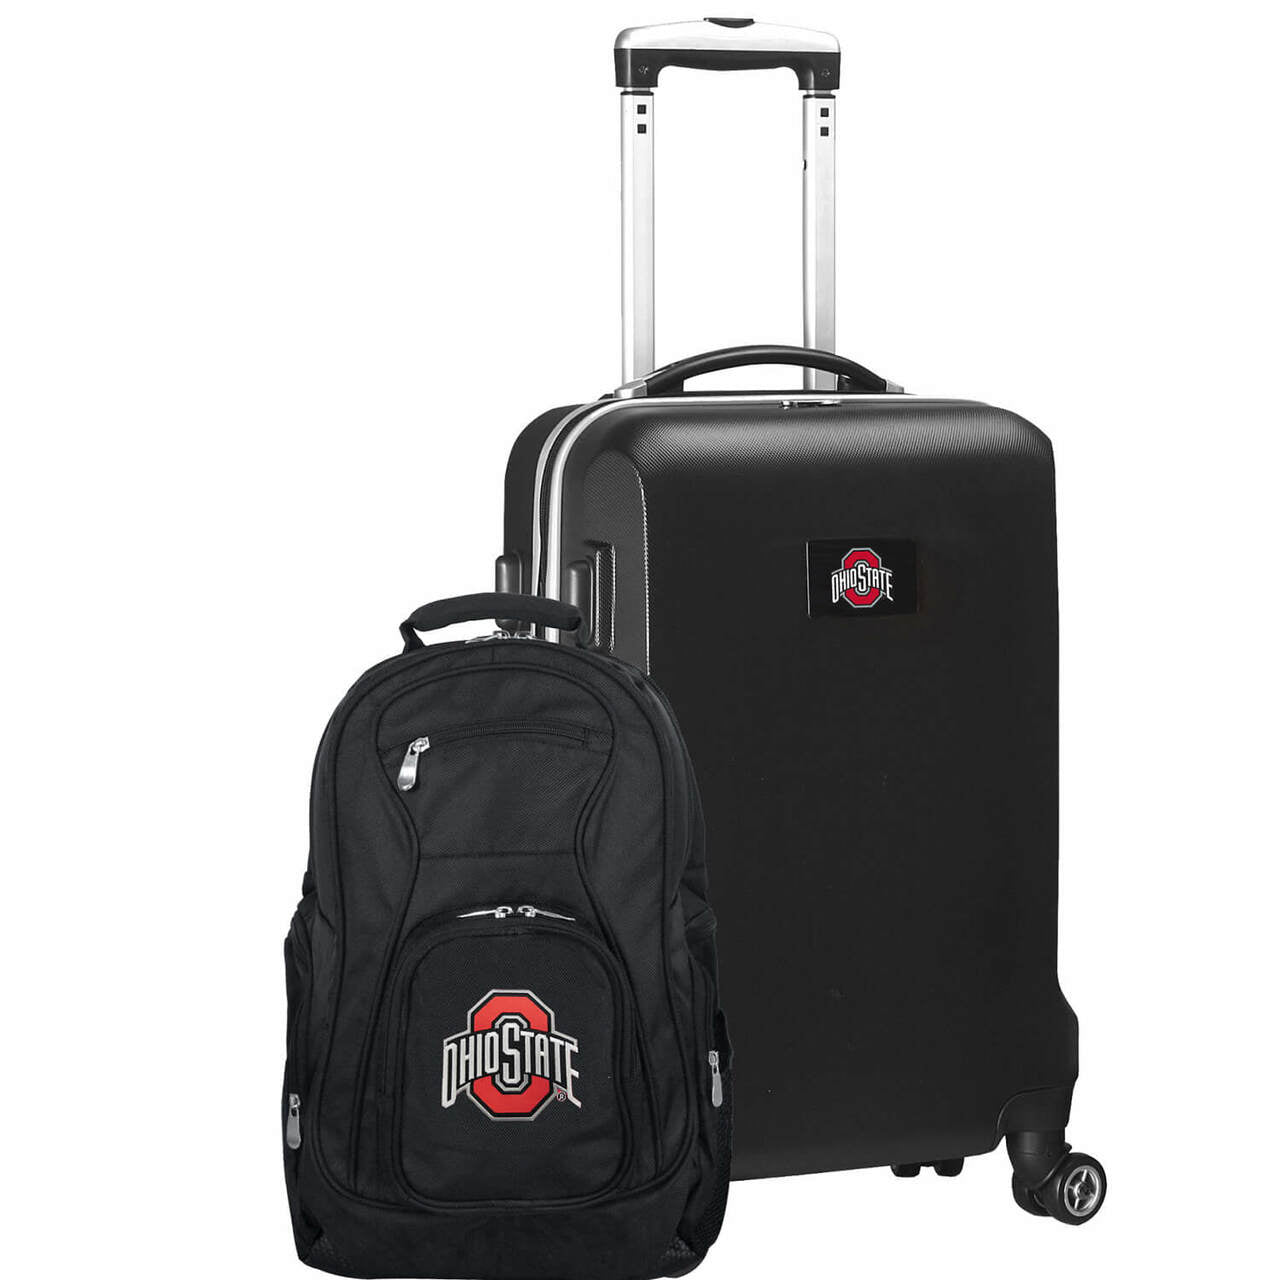 Ohio State University Buckeyes Deluxe 2-Piece Backpack and Carry on Set in Black